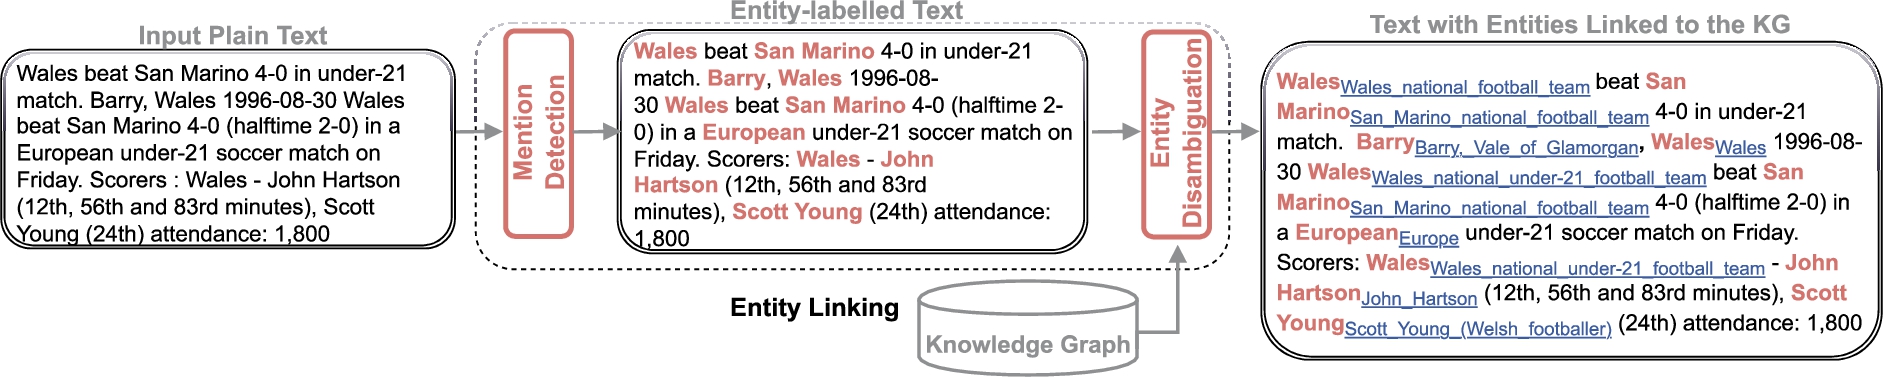 The entity linking task. An entity linking (EL) model takes a raw textual input and enriches it with entity mentions linked to nodes in a knowledge graph (KG). The task is commonly split into entity mention detection and entity disambiguation sub-tasks.